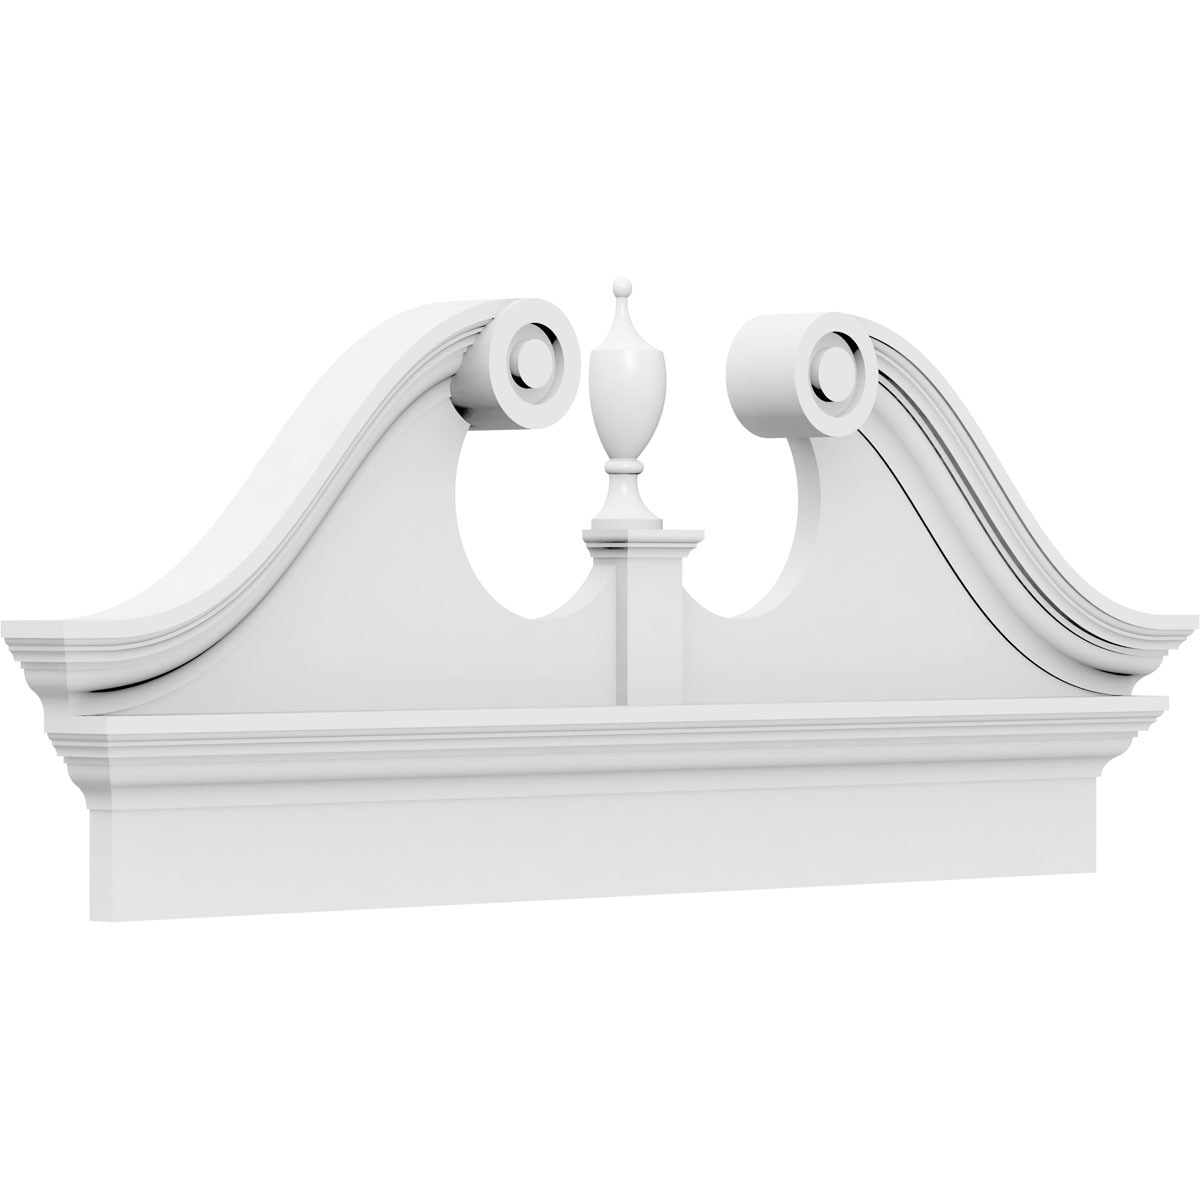 Ekena Millwork Rams Head 40-in x 16-7/8-in Unfinished PVC Pediment Entry Door Casing Accent in White | PEDPC040X170RHP00